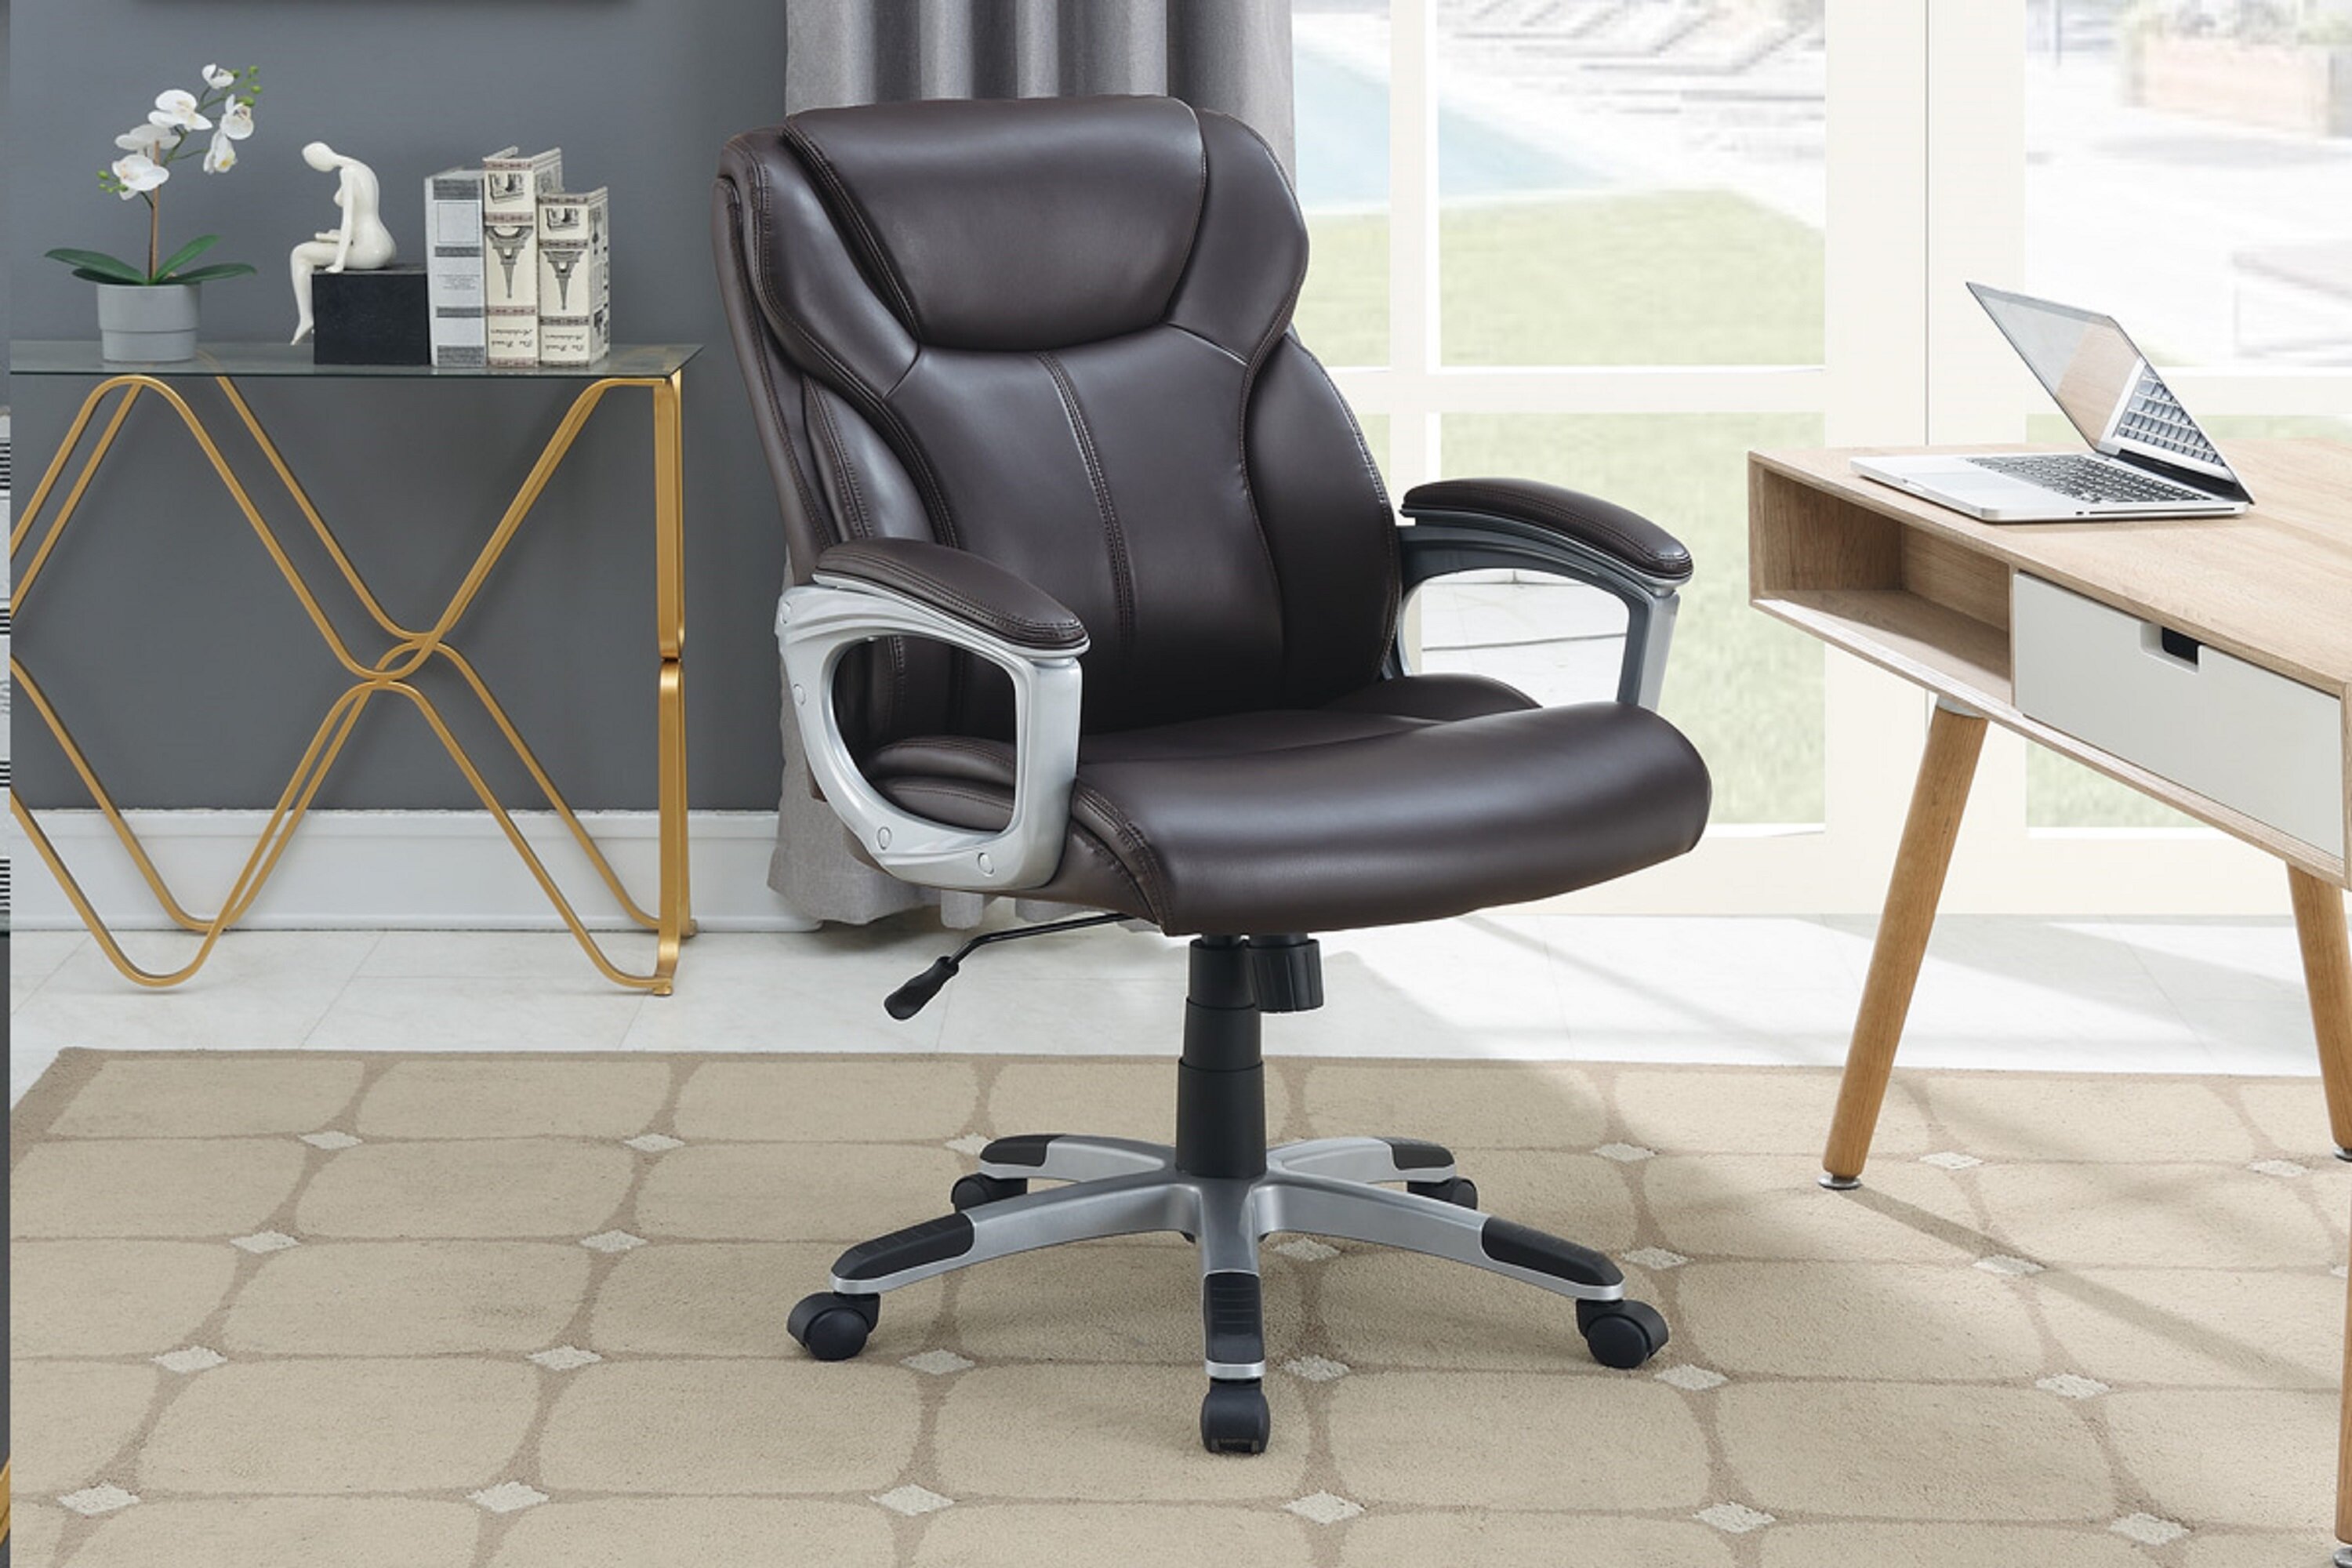 Details about   Erogonomic Black Executive Lumbar Stitched Leather Swivel Tilting Office Chair 